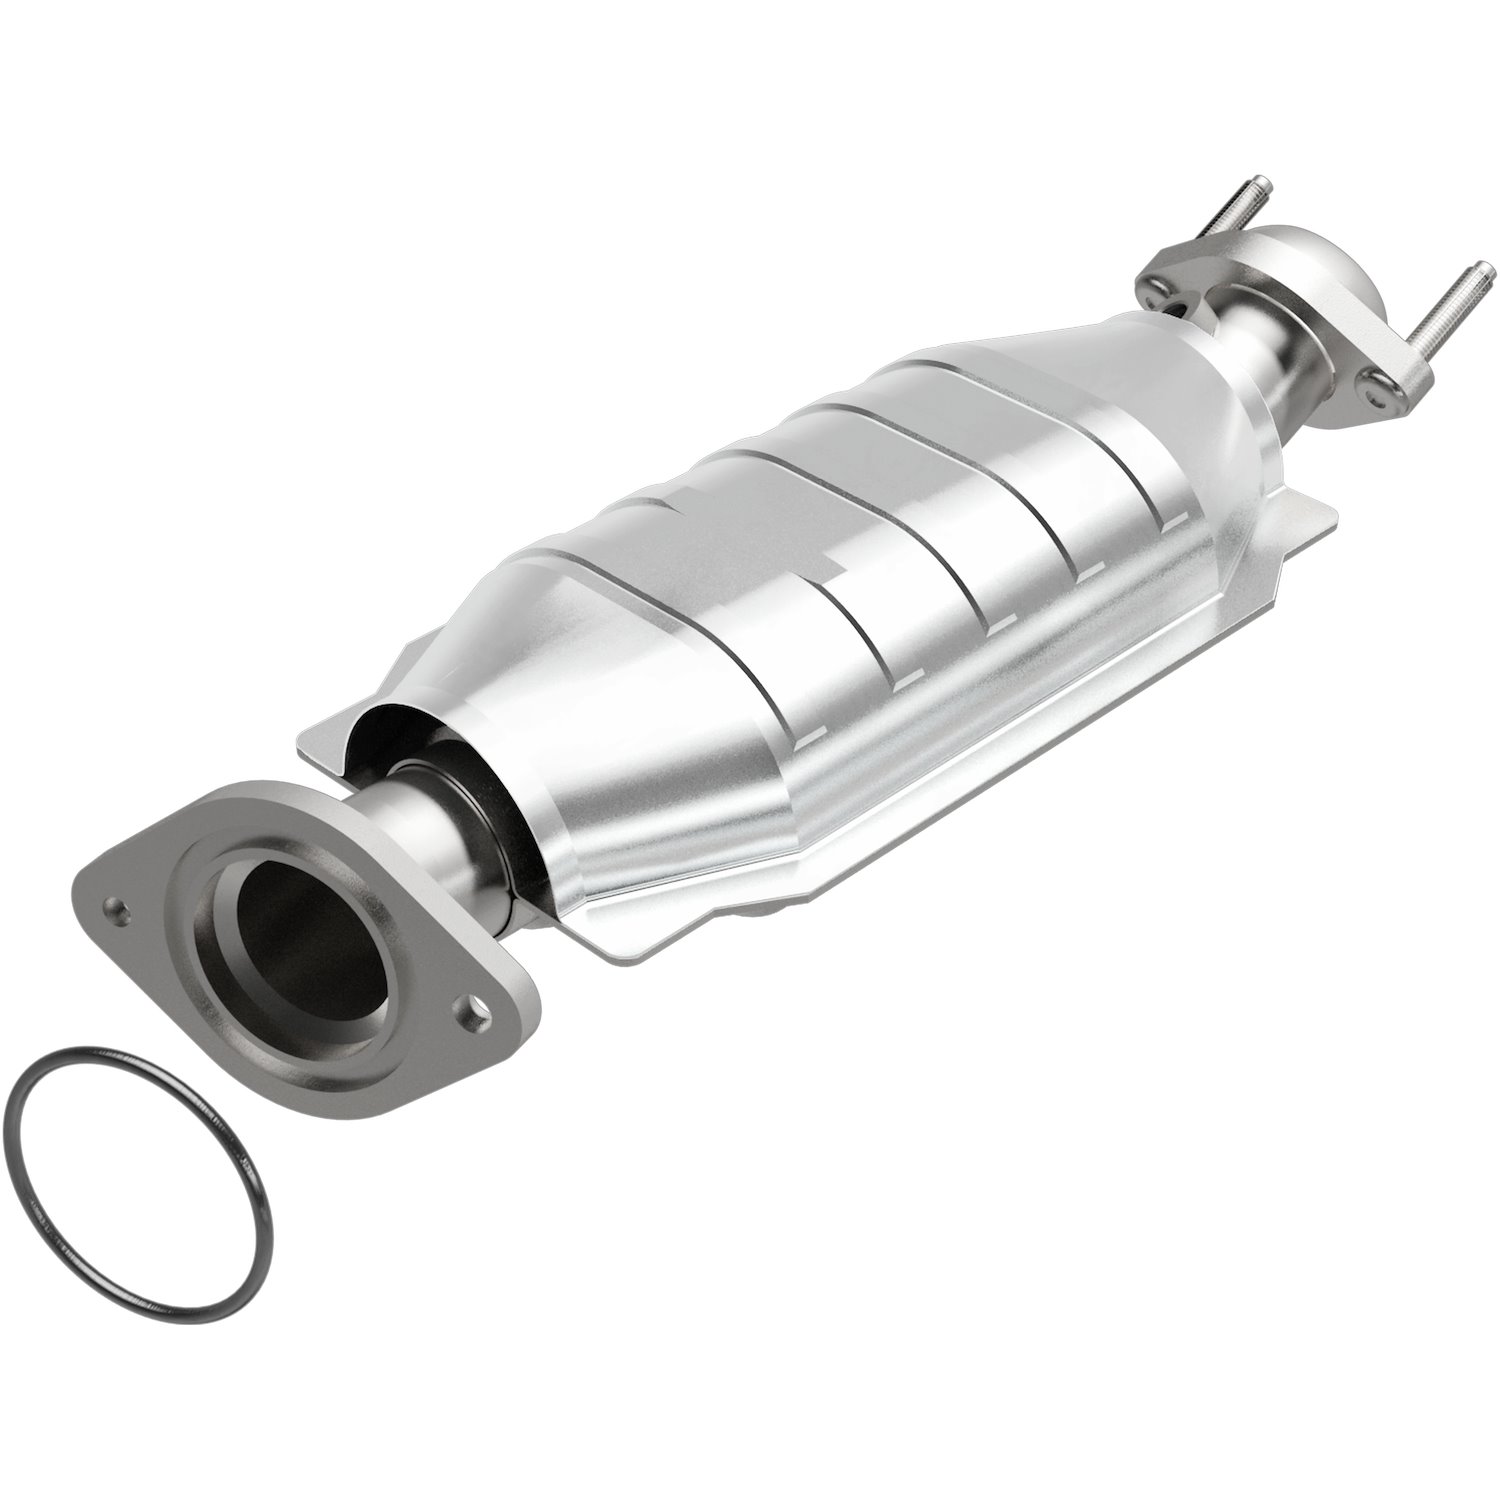 OEM Grade Federal / EPA Compliant Direct-Fit Catalytic Converter 49978